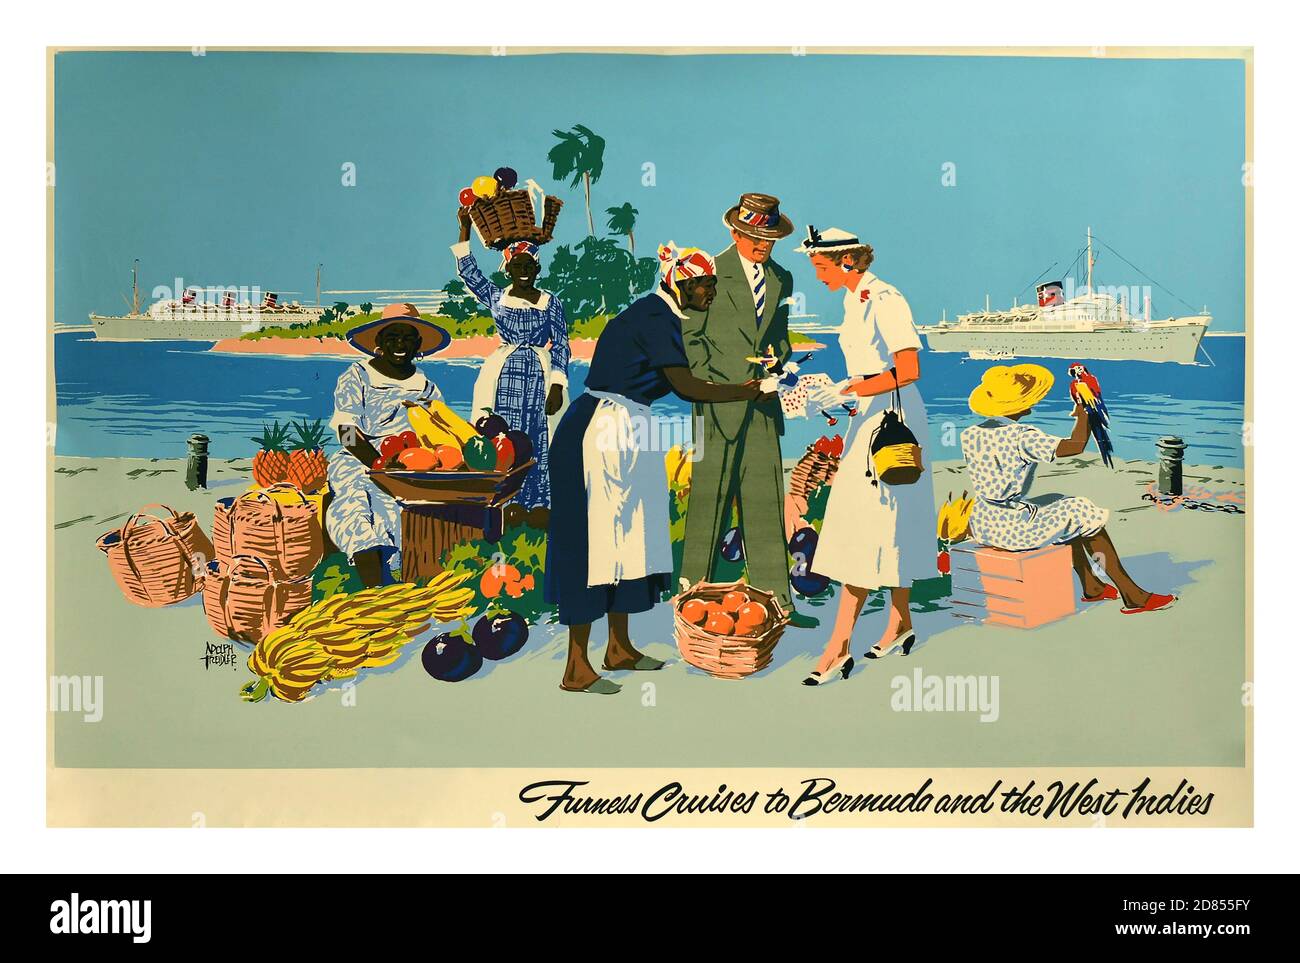 Vintage 1950s Cruise Ship travel poster for Furness Cruises to Bermuda and the West Indies - artwork by notable American artist Adolph Treidler (1886–1981) features a smartly dressed tourist couple shopping at a beach fruit market for baskets of bananas, pineapples, mangoes and other fruits. A lady is holding a parrot and looking out to sea at a cruise ship and small desert island.The Furness Bermuda Line was a British shipping line that operated during the 20th century. Horizontal. UK, designer: Adolf Treidler, year of printing: 1959 Stock Photo